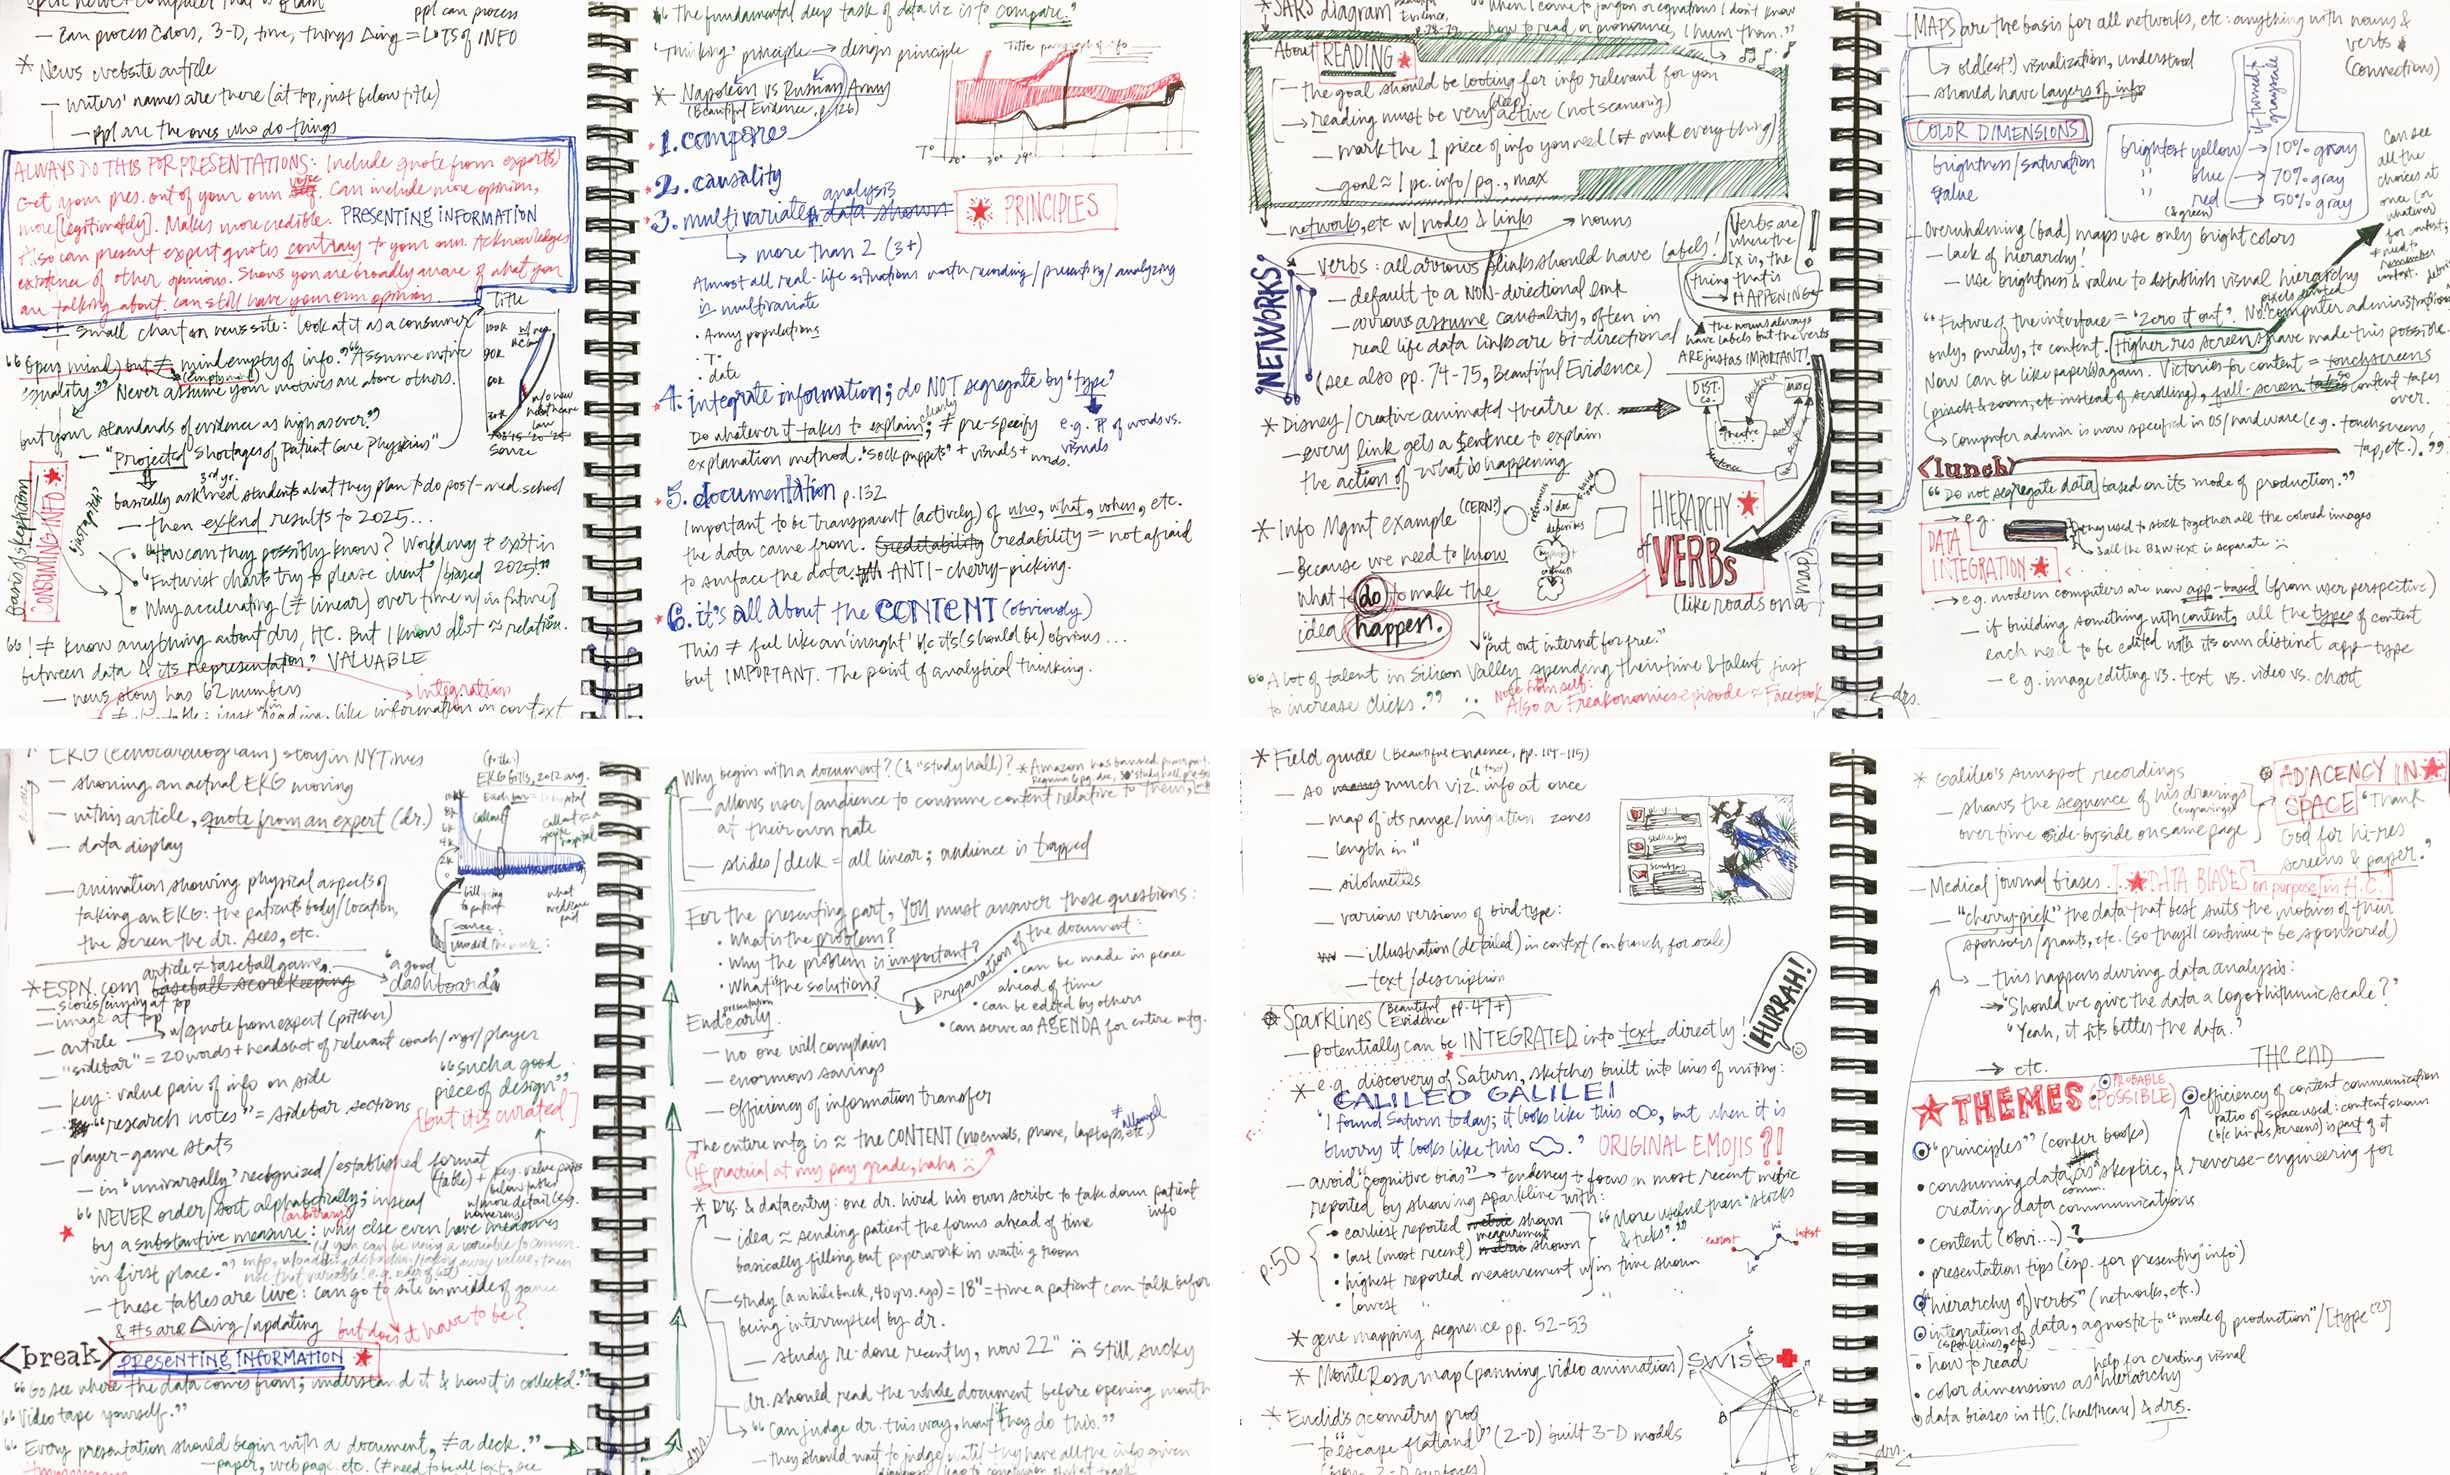 Four full-page notebook spreads are covered in black, blue, green, and red ink.